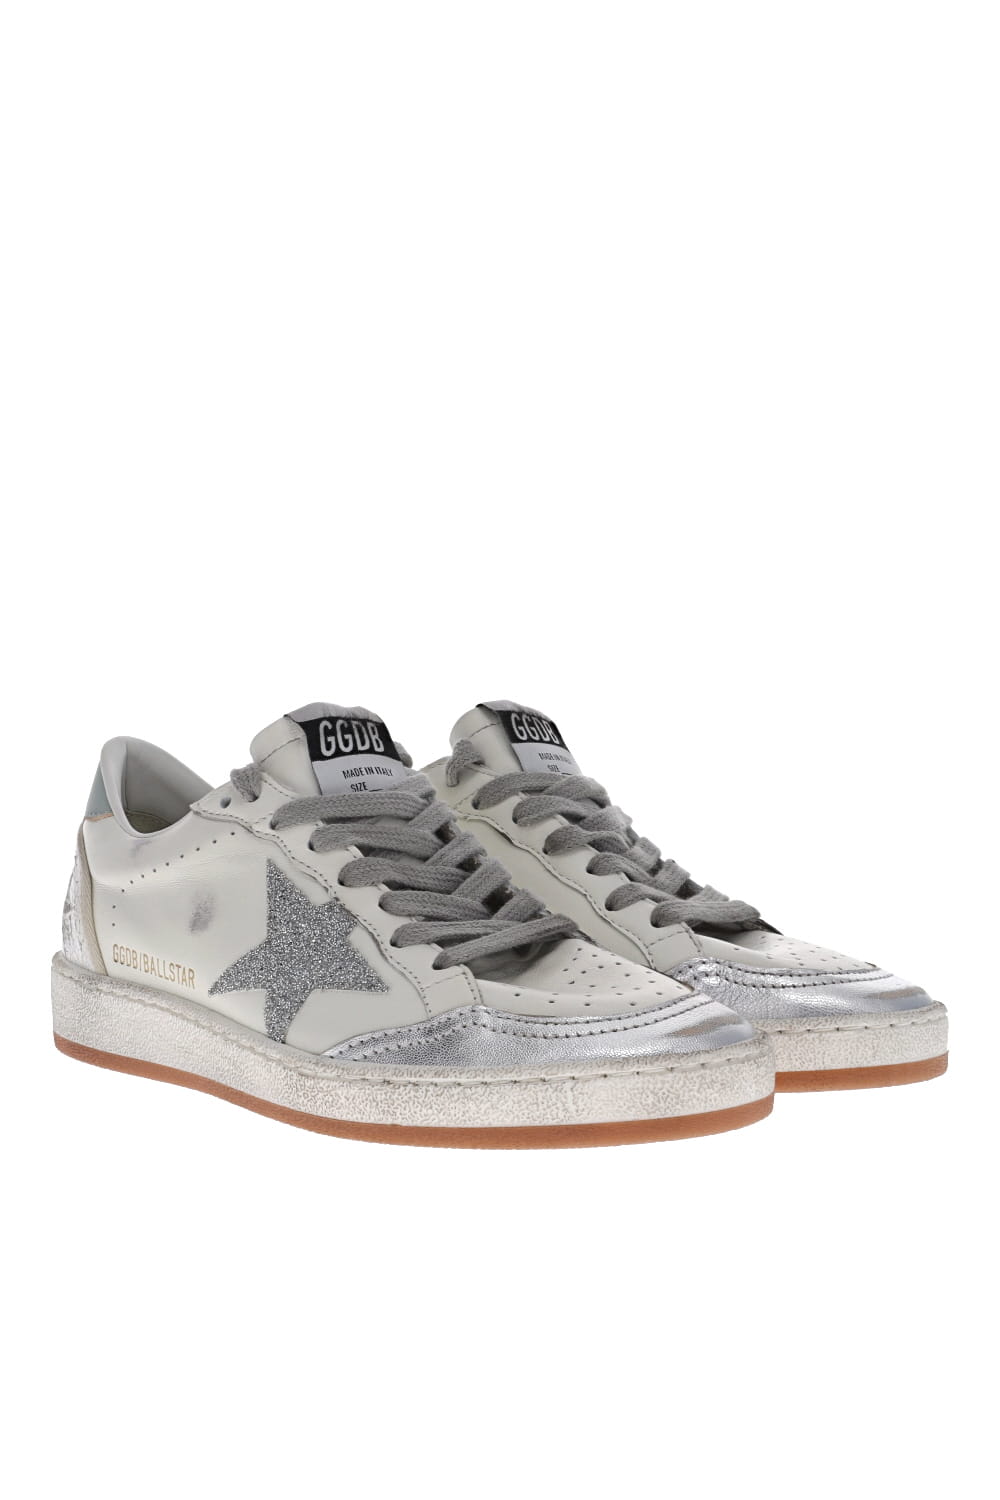 Ball Star Crystal Cracked Leather Sneakers